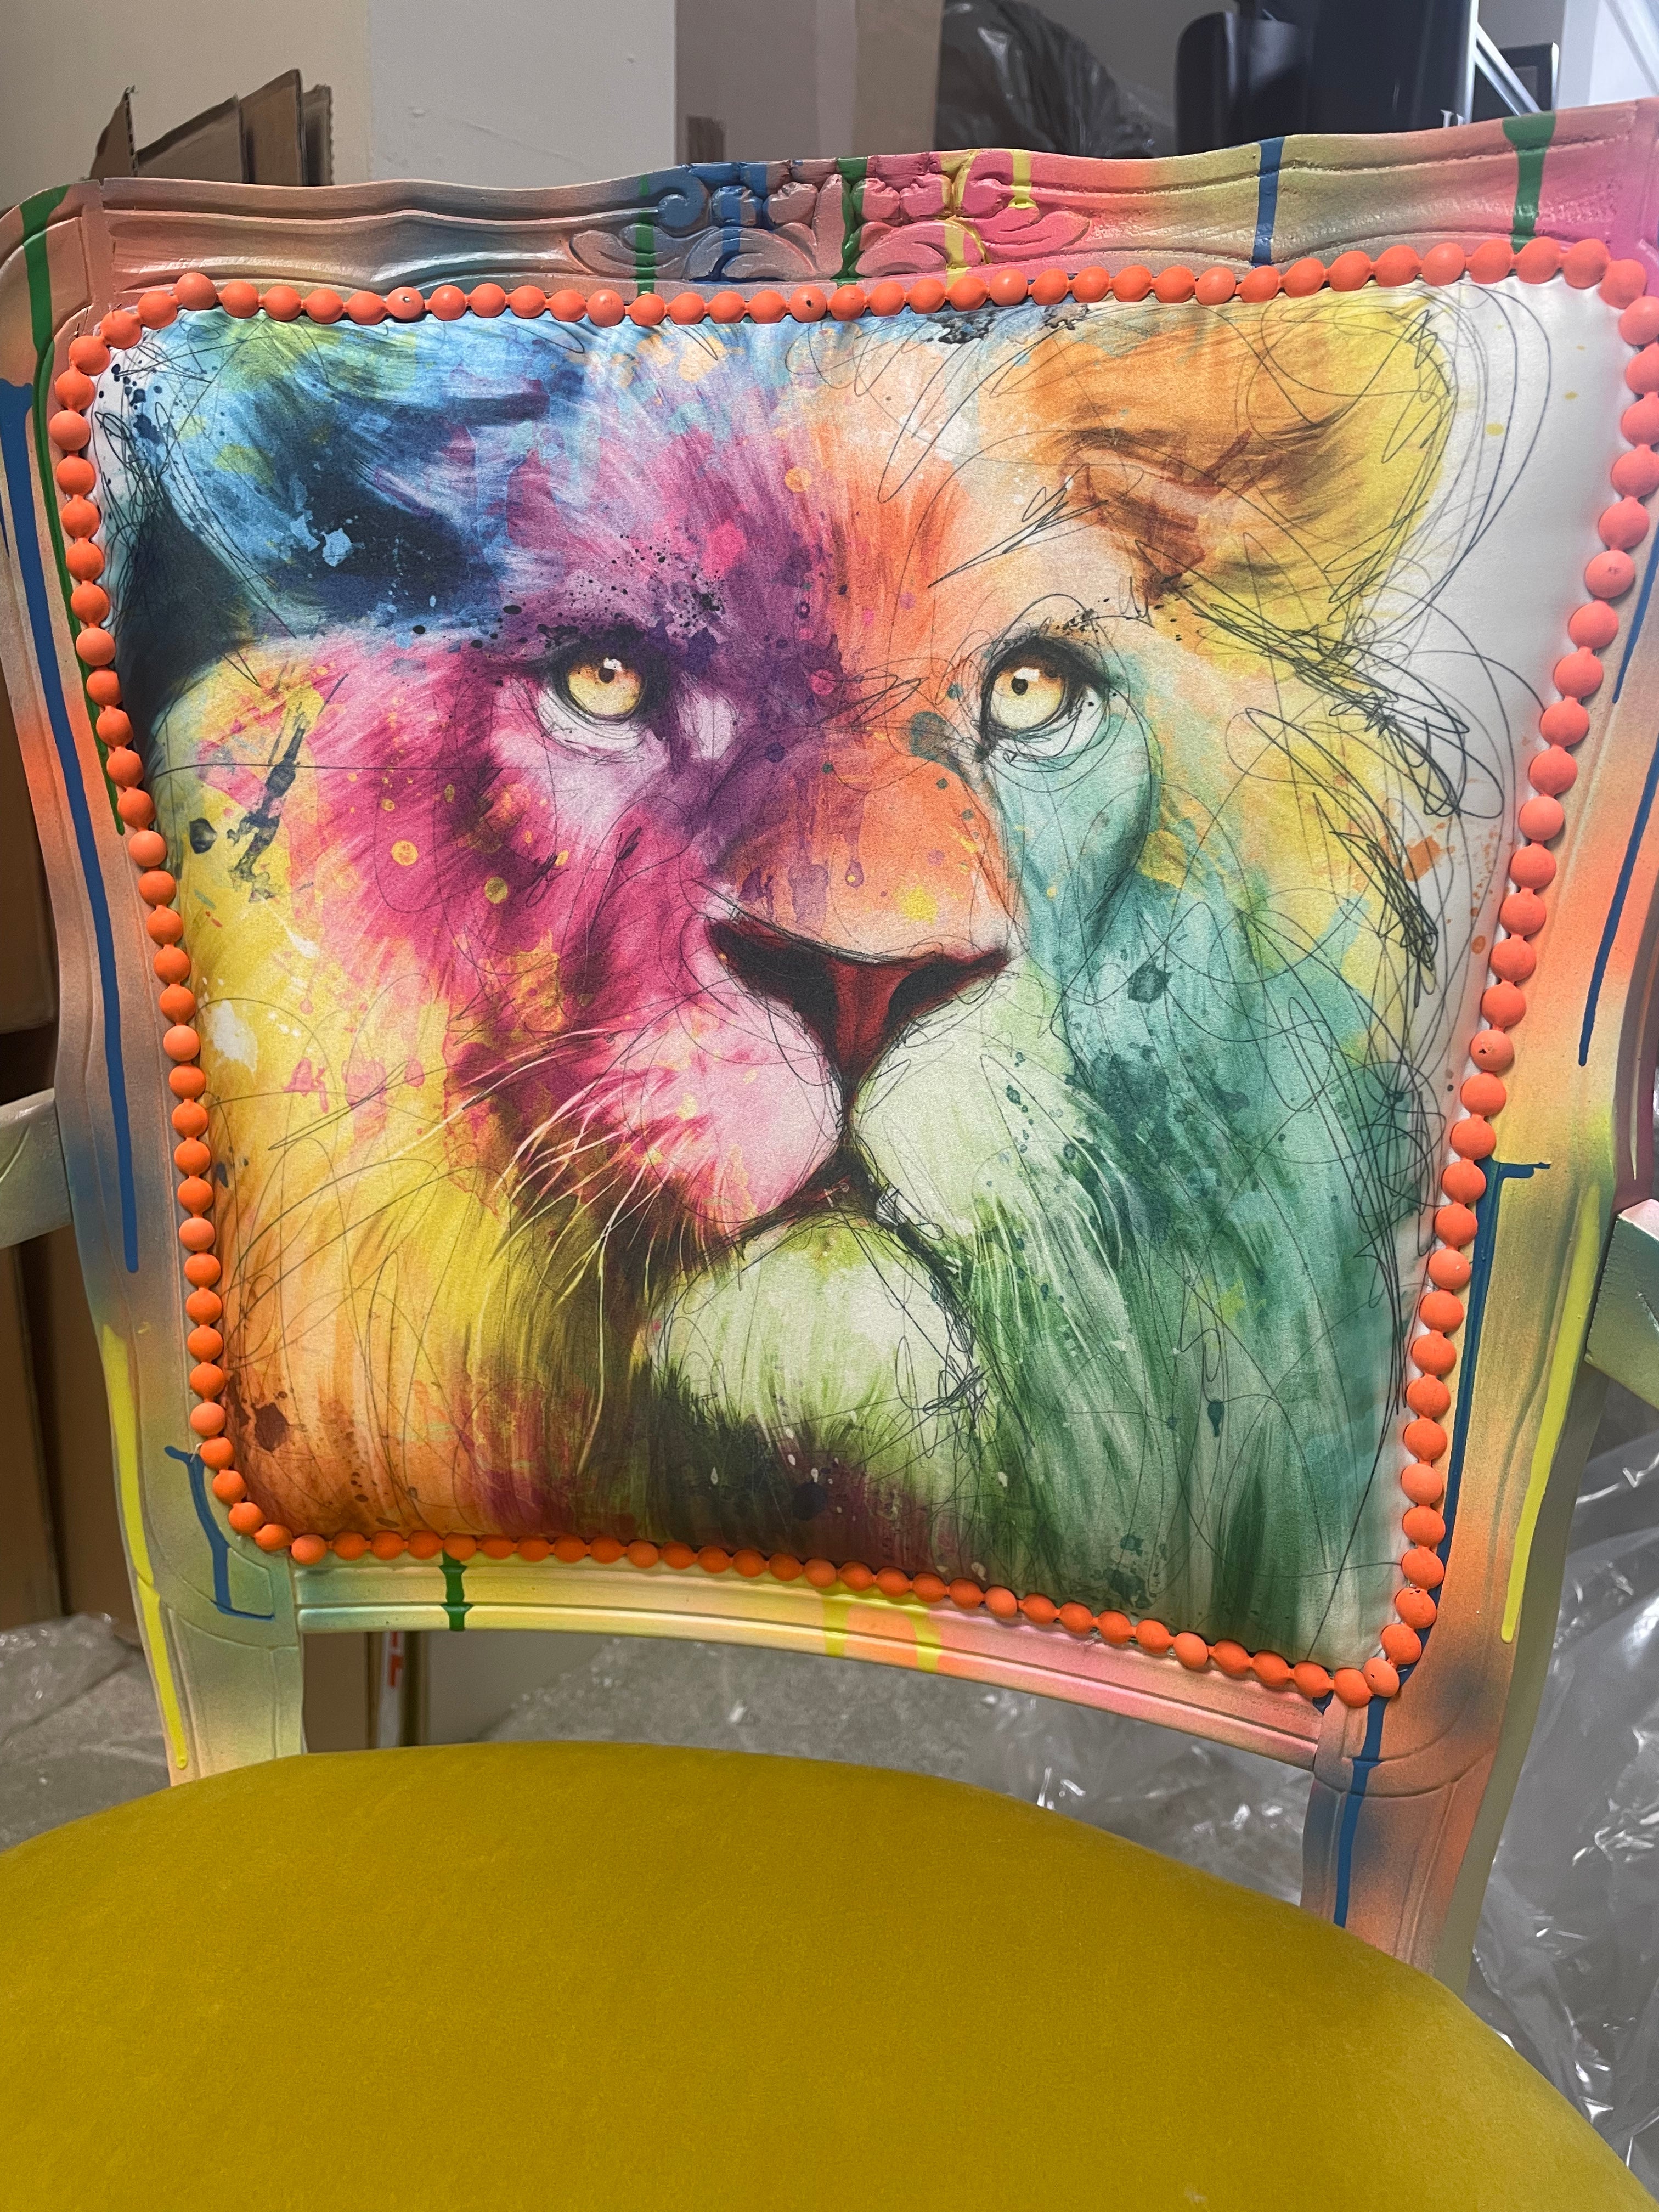 Yellow Lion Graffiti Chair with arms